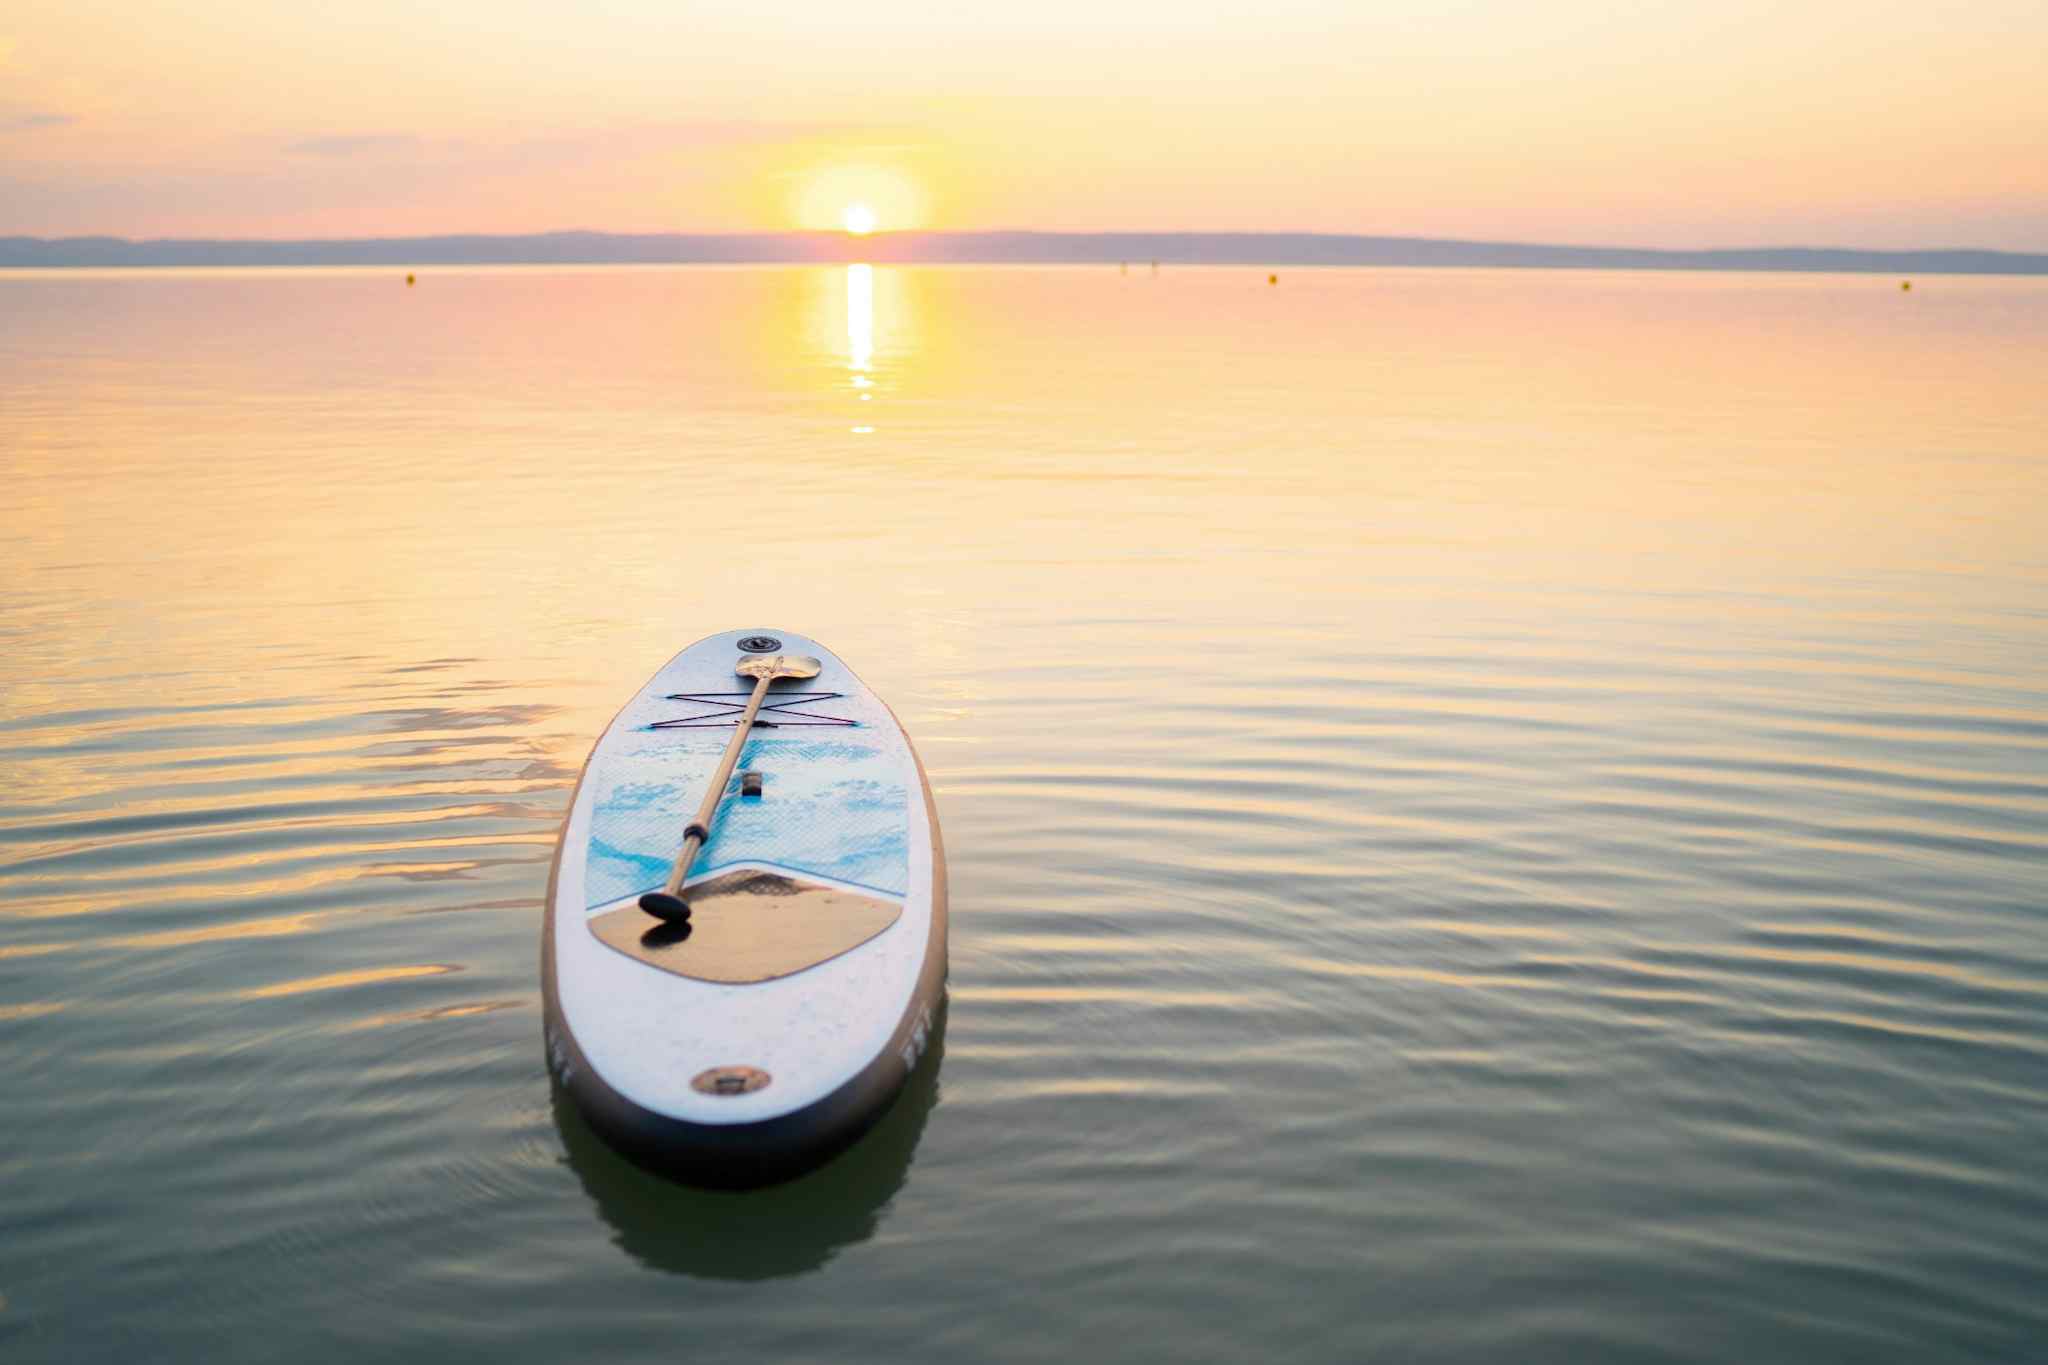 https://www.canva.com/photos/MAEECCwR-tQ-standup-paddle-board-on-empty-lake-in-sunset/